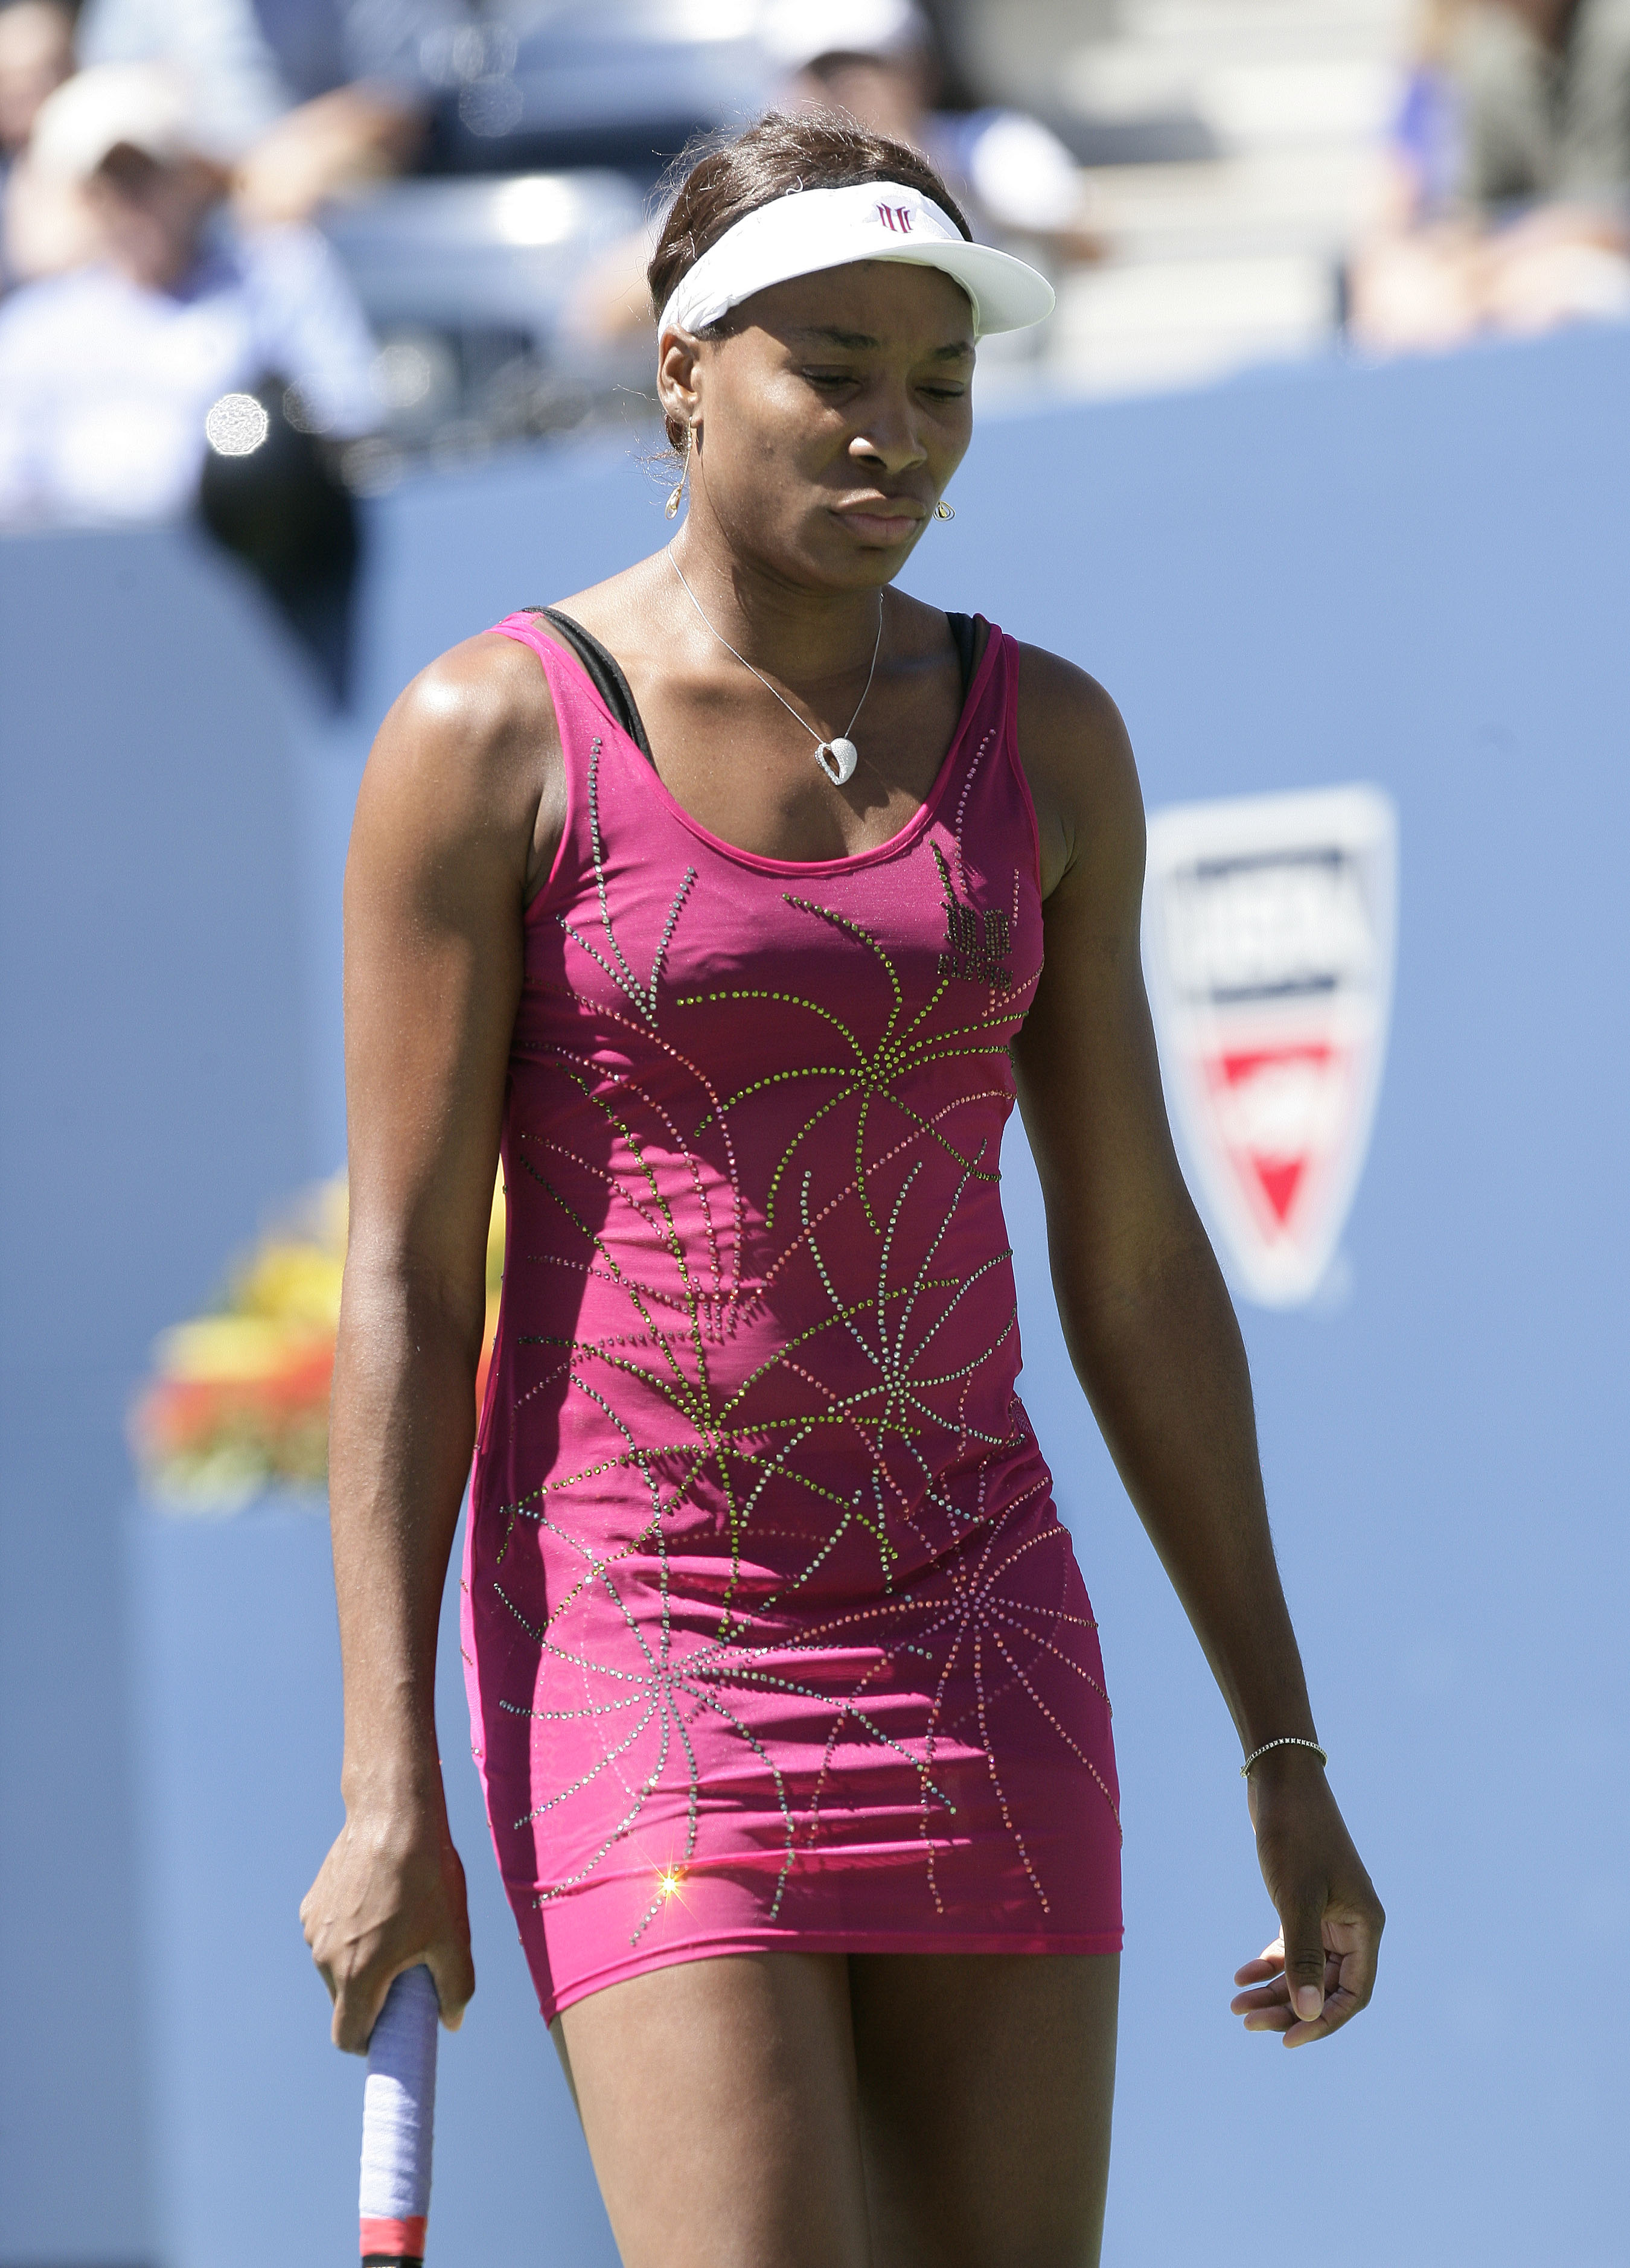 Venus Williams in action during her match against Peer at the US Open